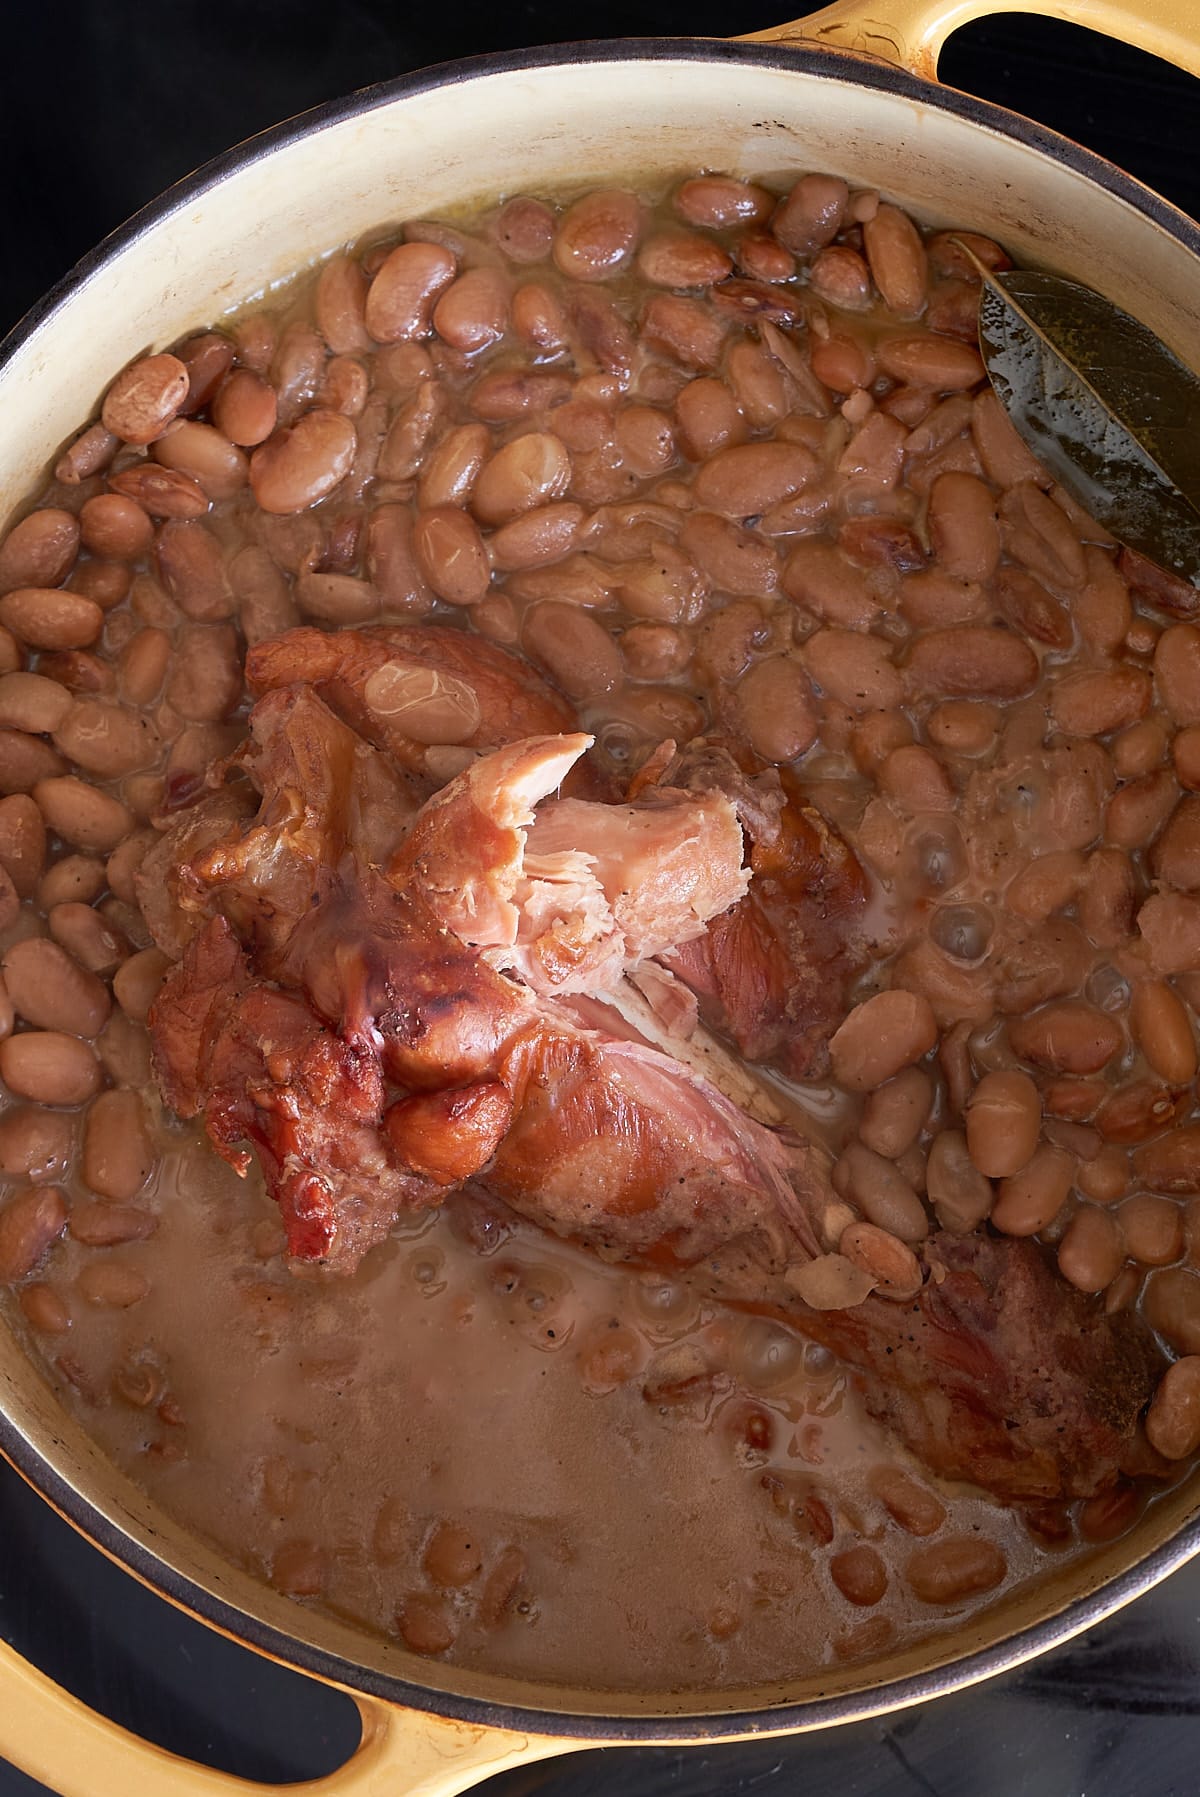 A Dutch oven filled with pinto beans and a smoked turkey leg in chicken broth.